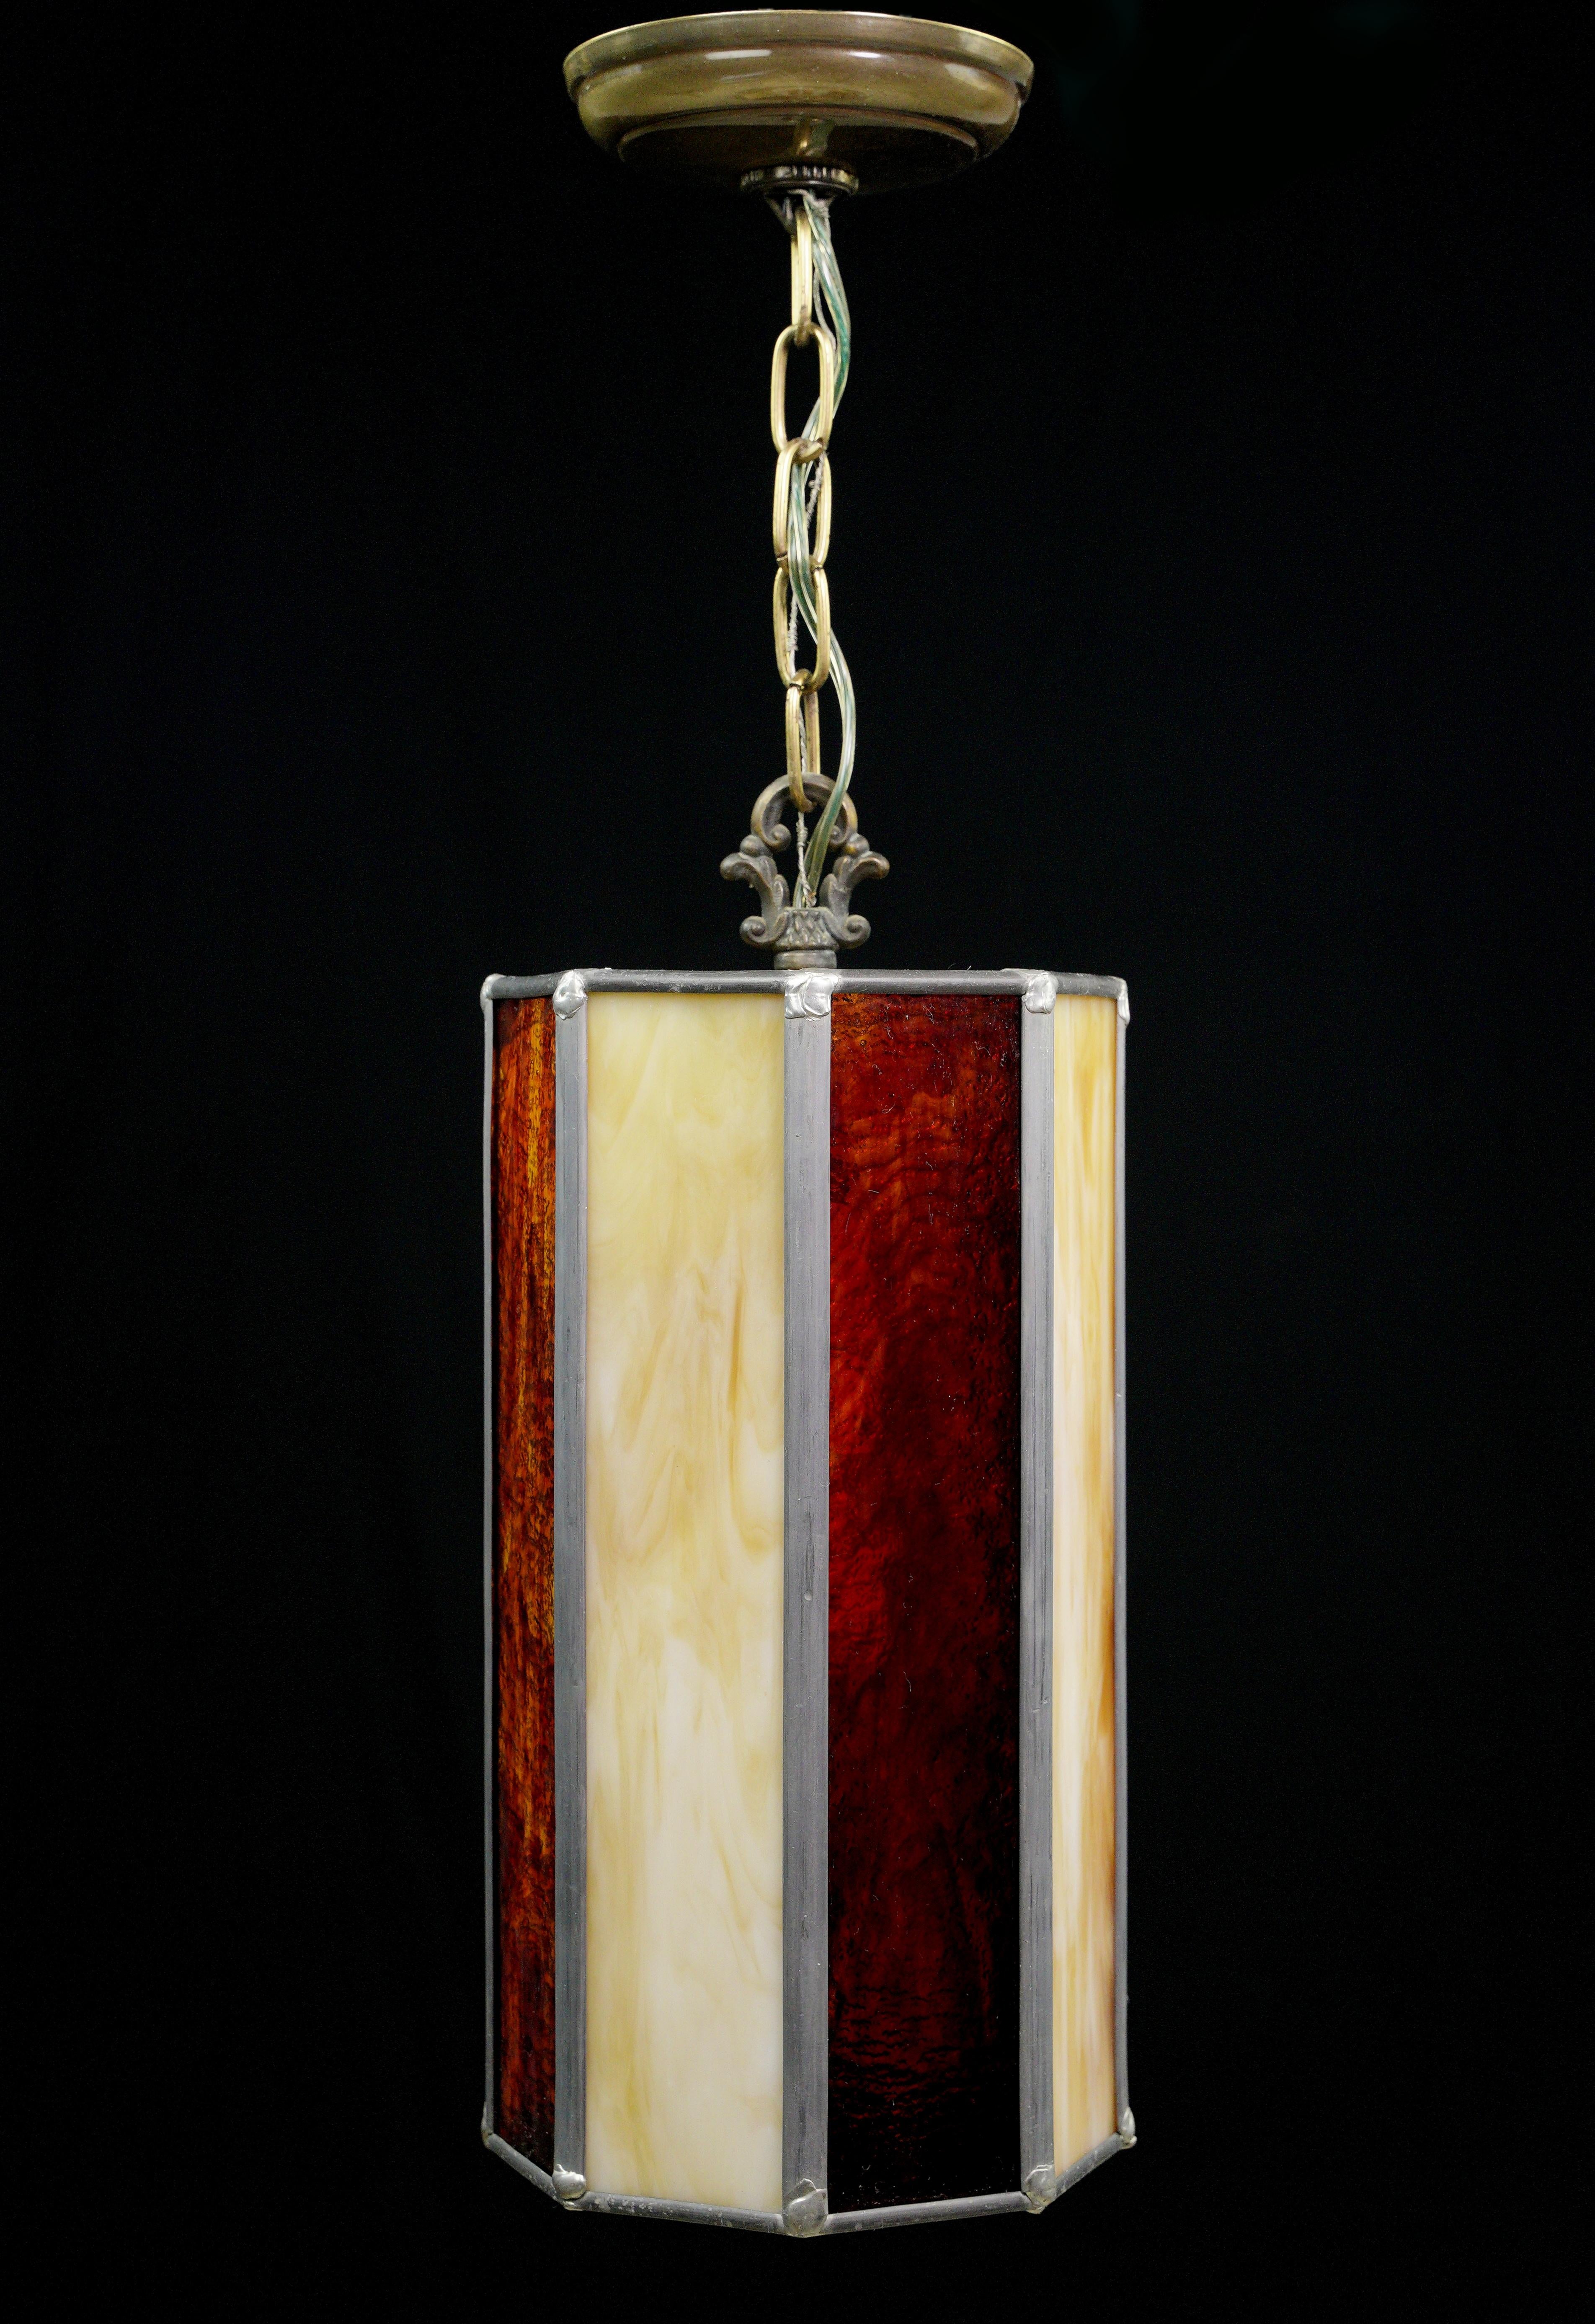 This brass chain pendant light is a captivating piece, fusing artistry and functionality. The leaded stained glass in red and tan hues casts a mesmerizing glow, while the brass chain adds a touch of vintage charm, elevating any interior with its